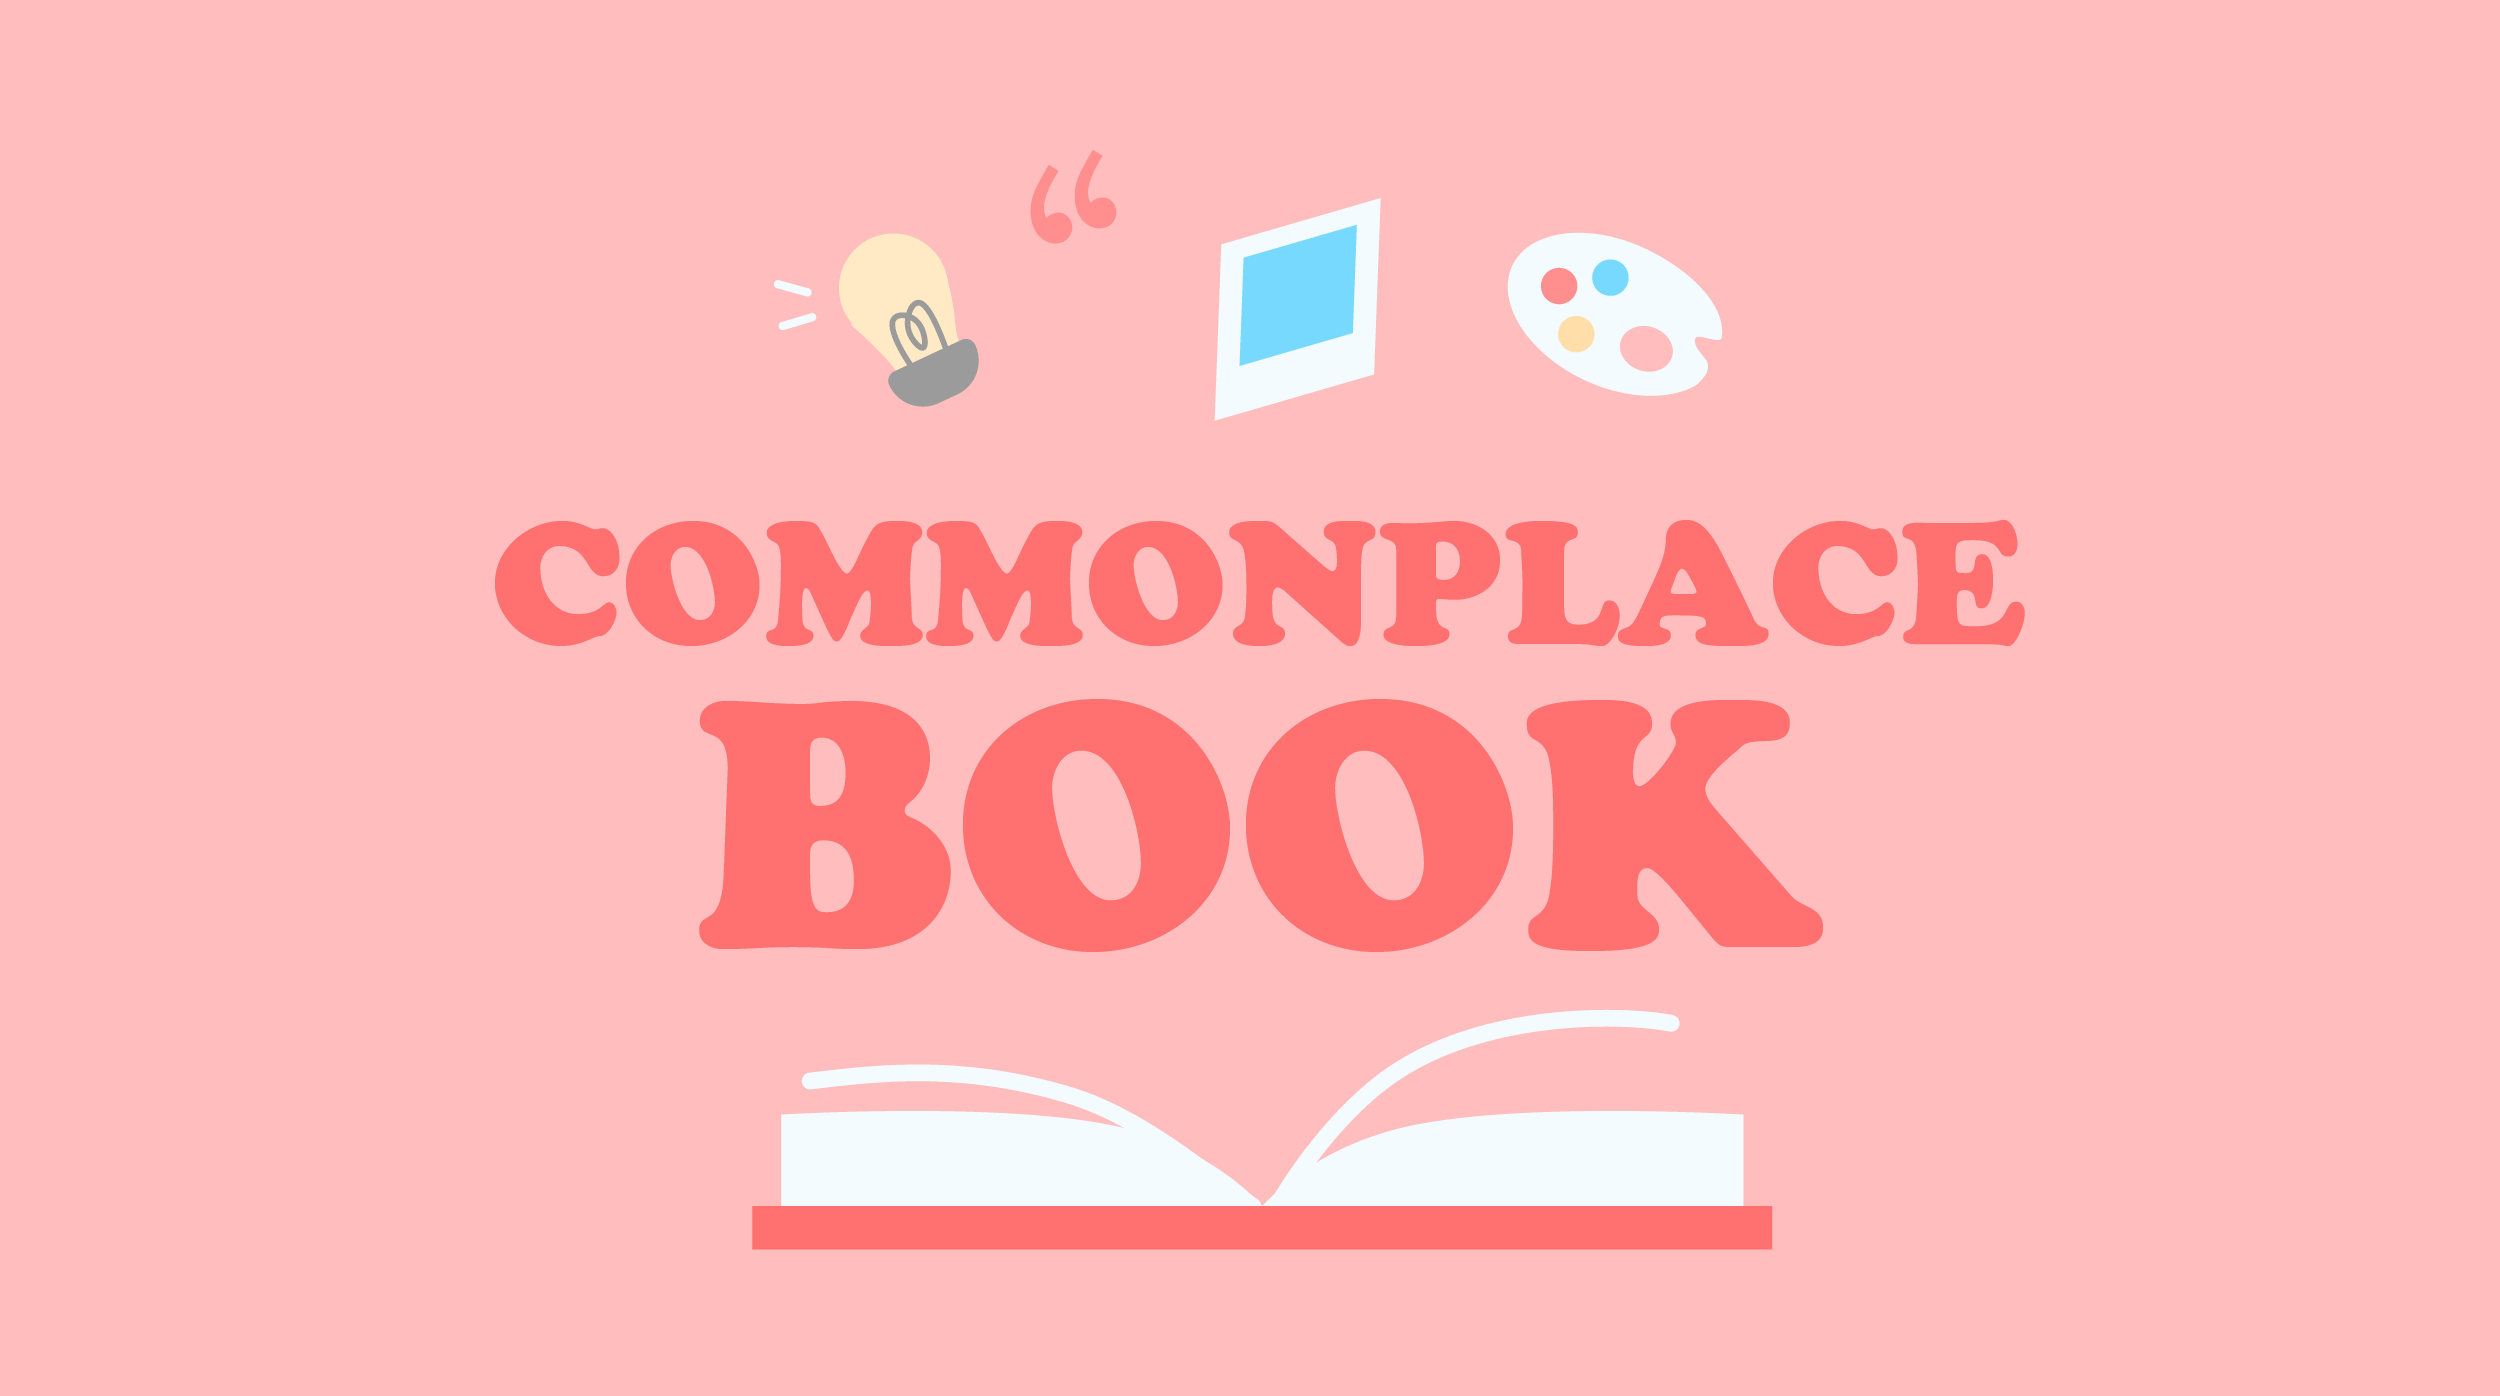 Have You Heard of a Commonplace Book?